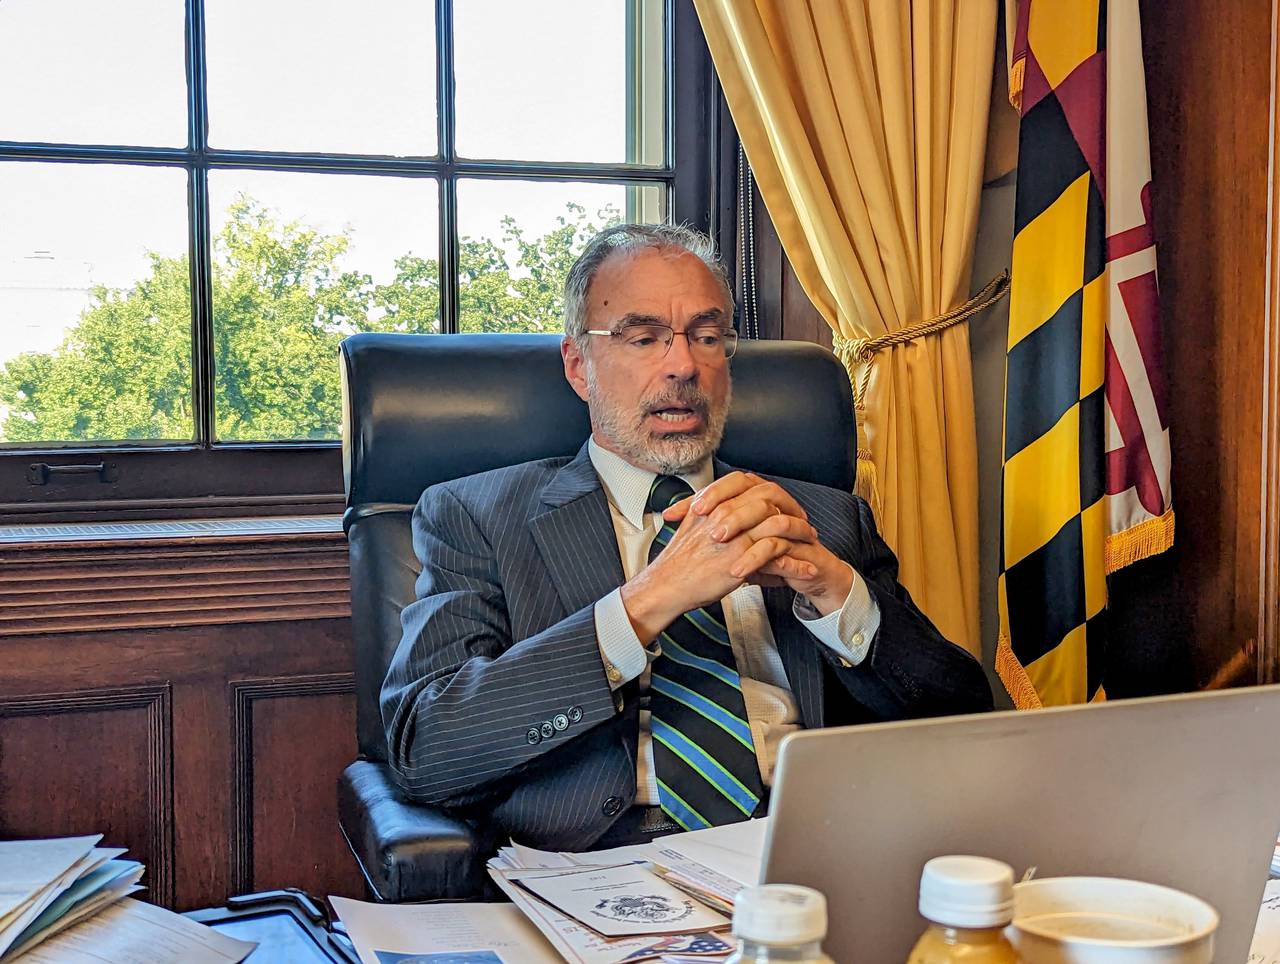 U.S. Rep. Andy Harris talks about the choice of a new speaker of the House Thursday in his Washington office.